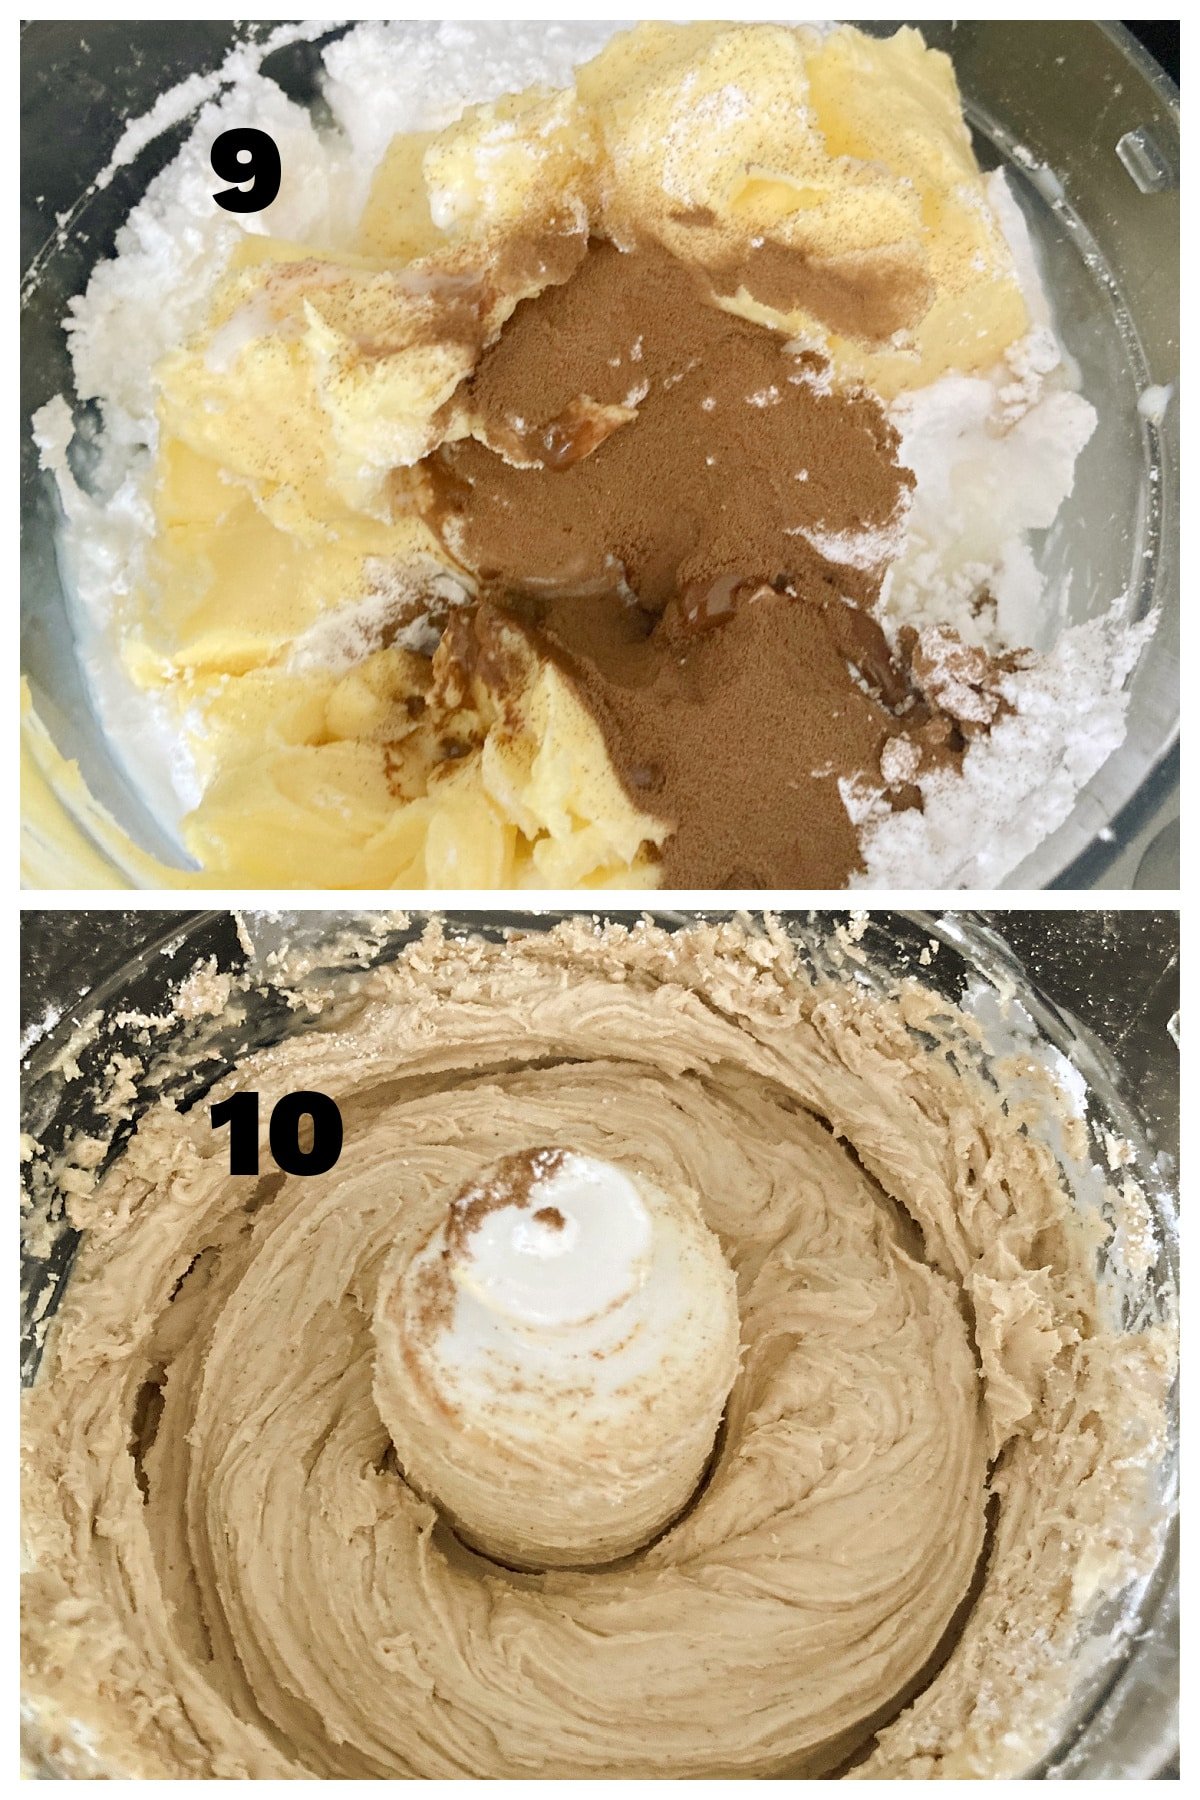 Collage of 2 photos to show how to make coffee buttercream.